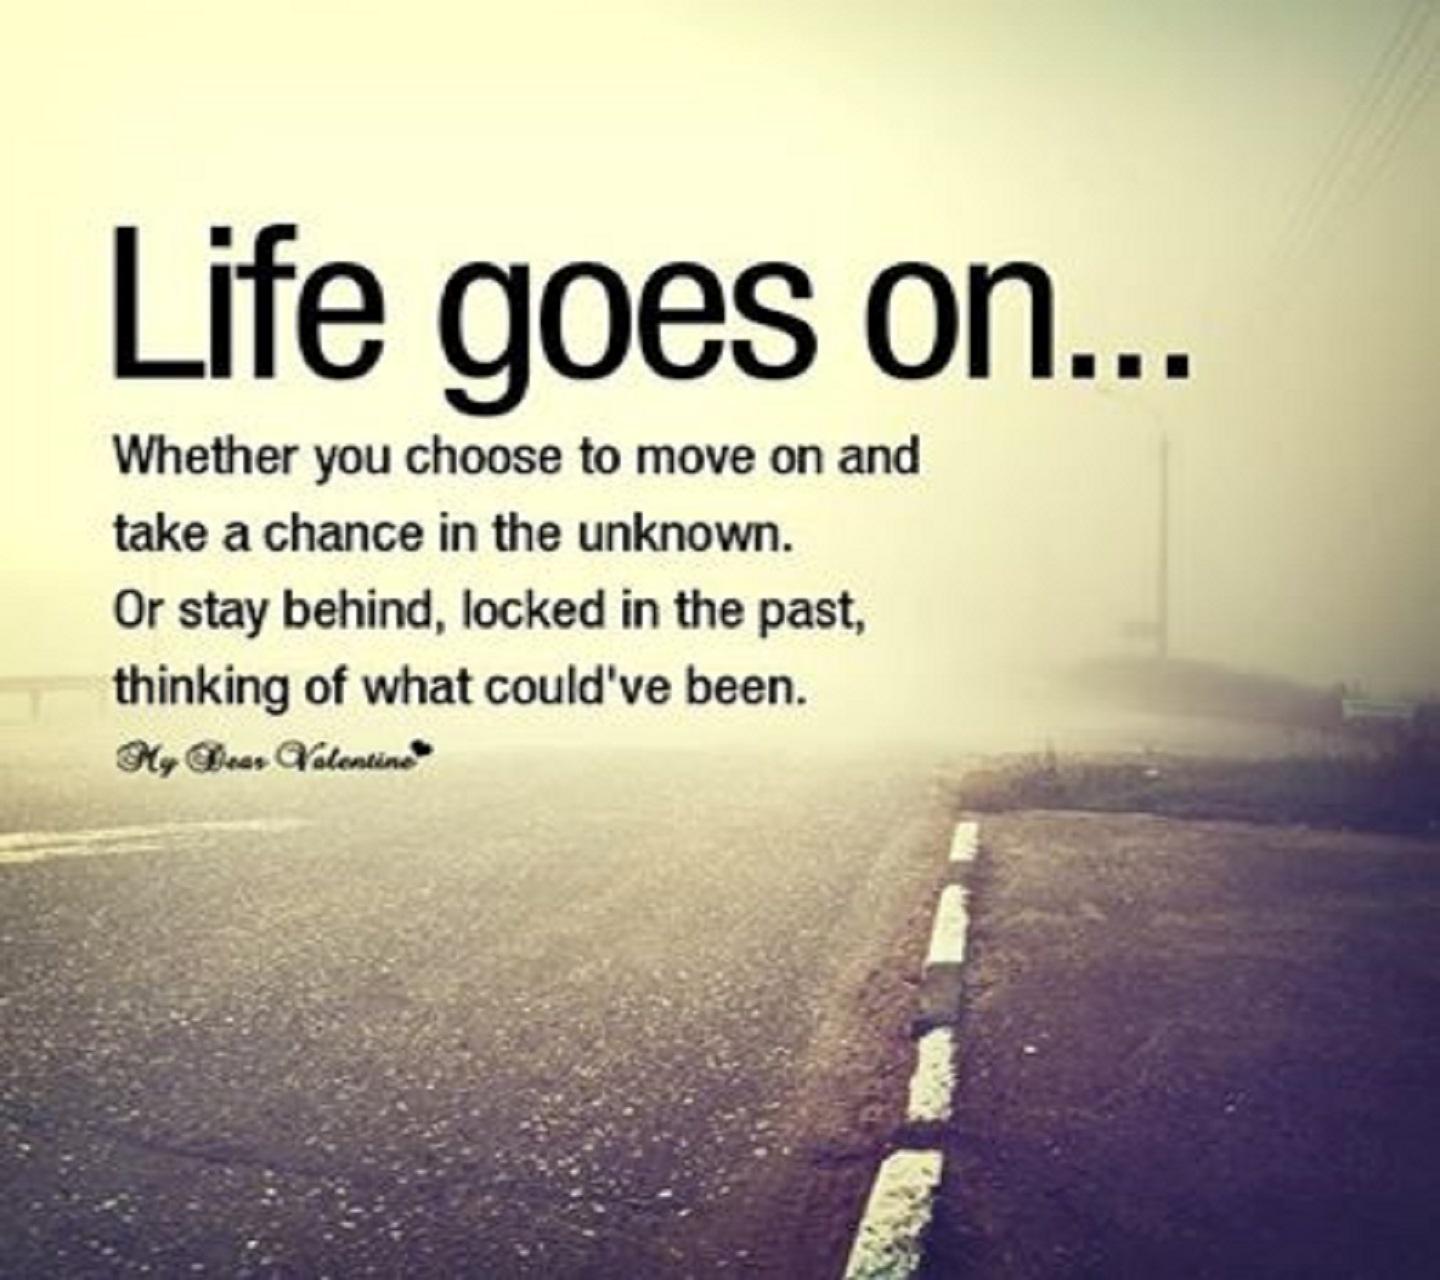 Download life Goes On Wide Wallpaper For Laptop Wallpaper